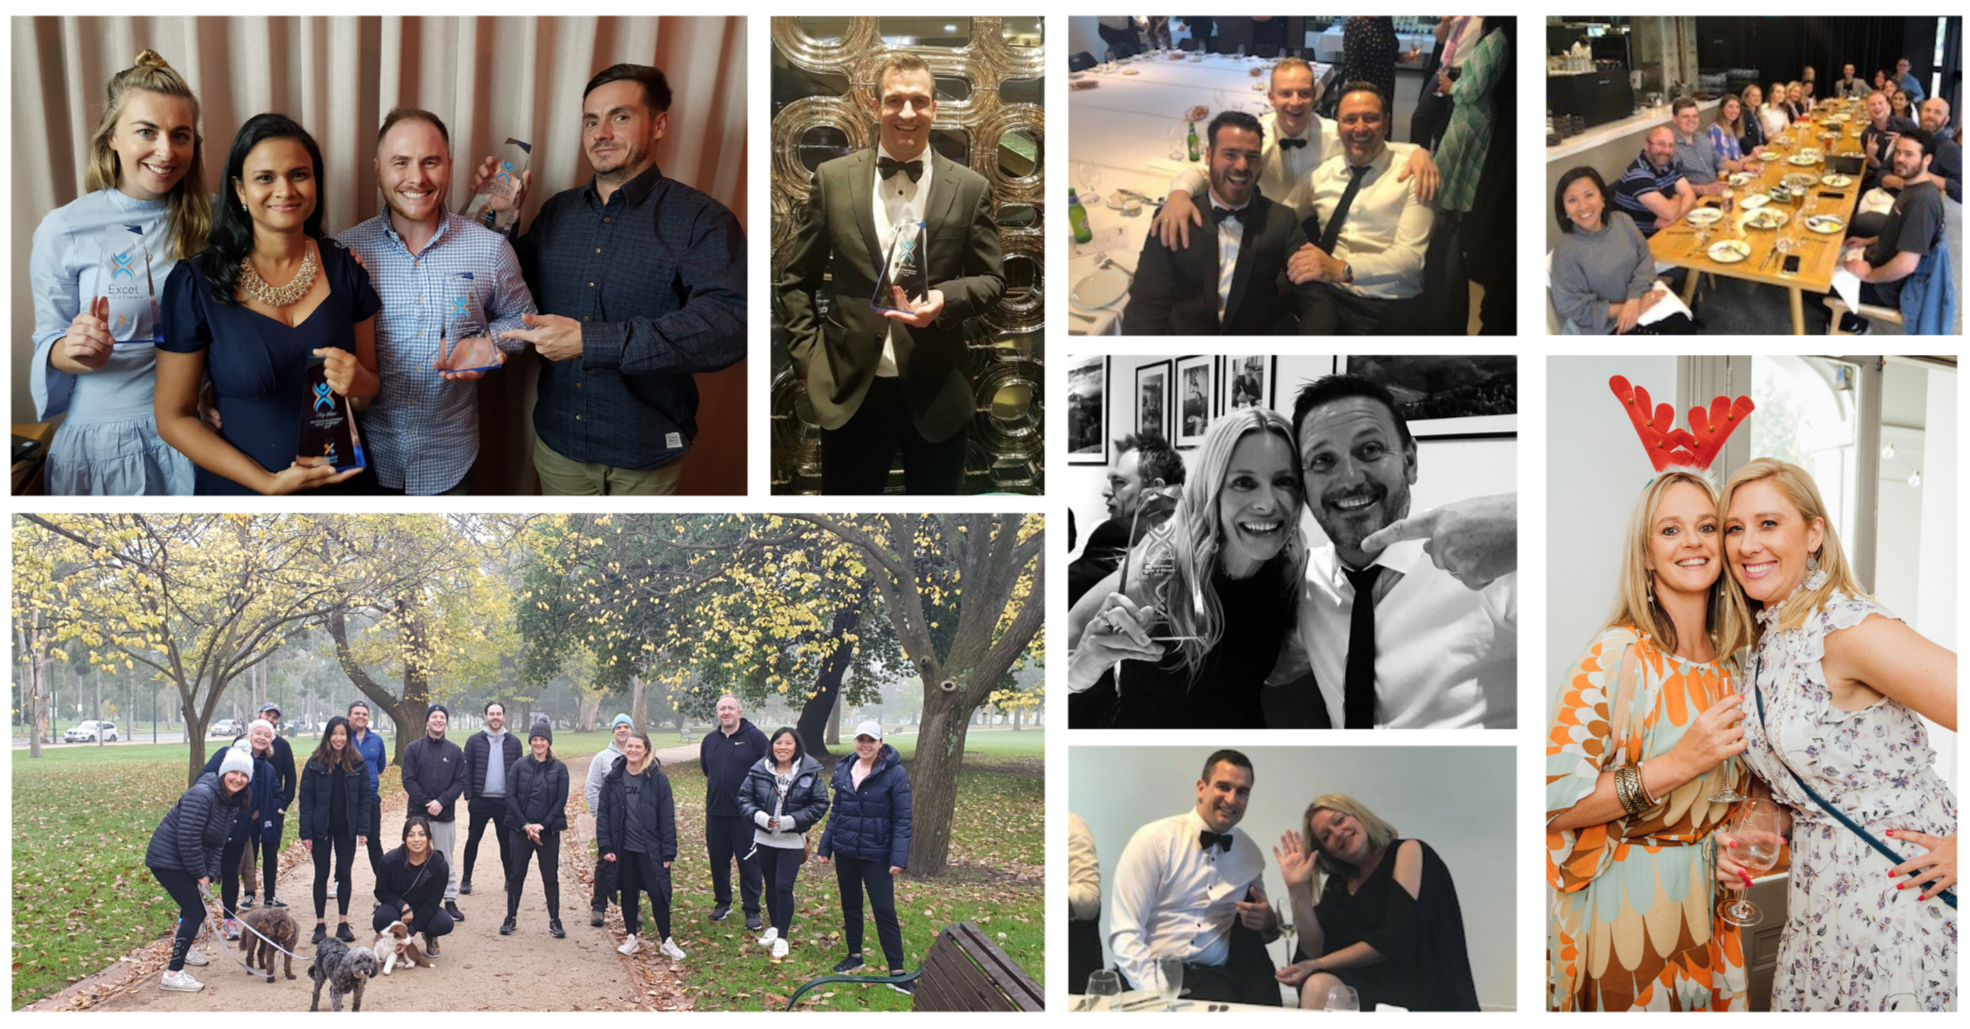 A collage of the Experis team having a great time together.